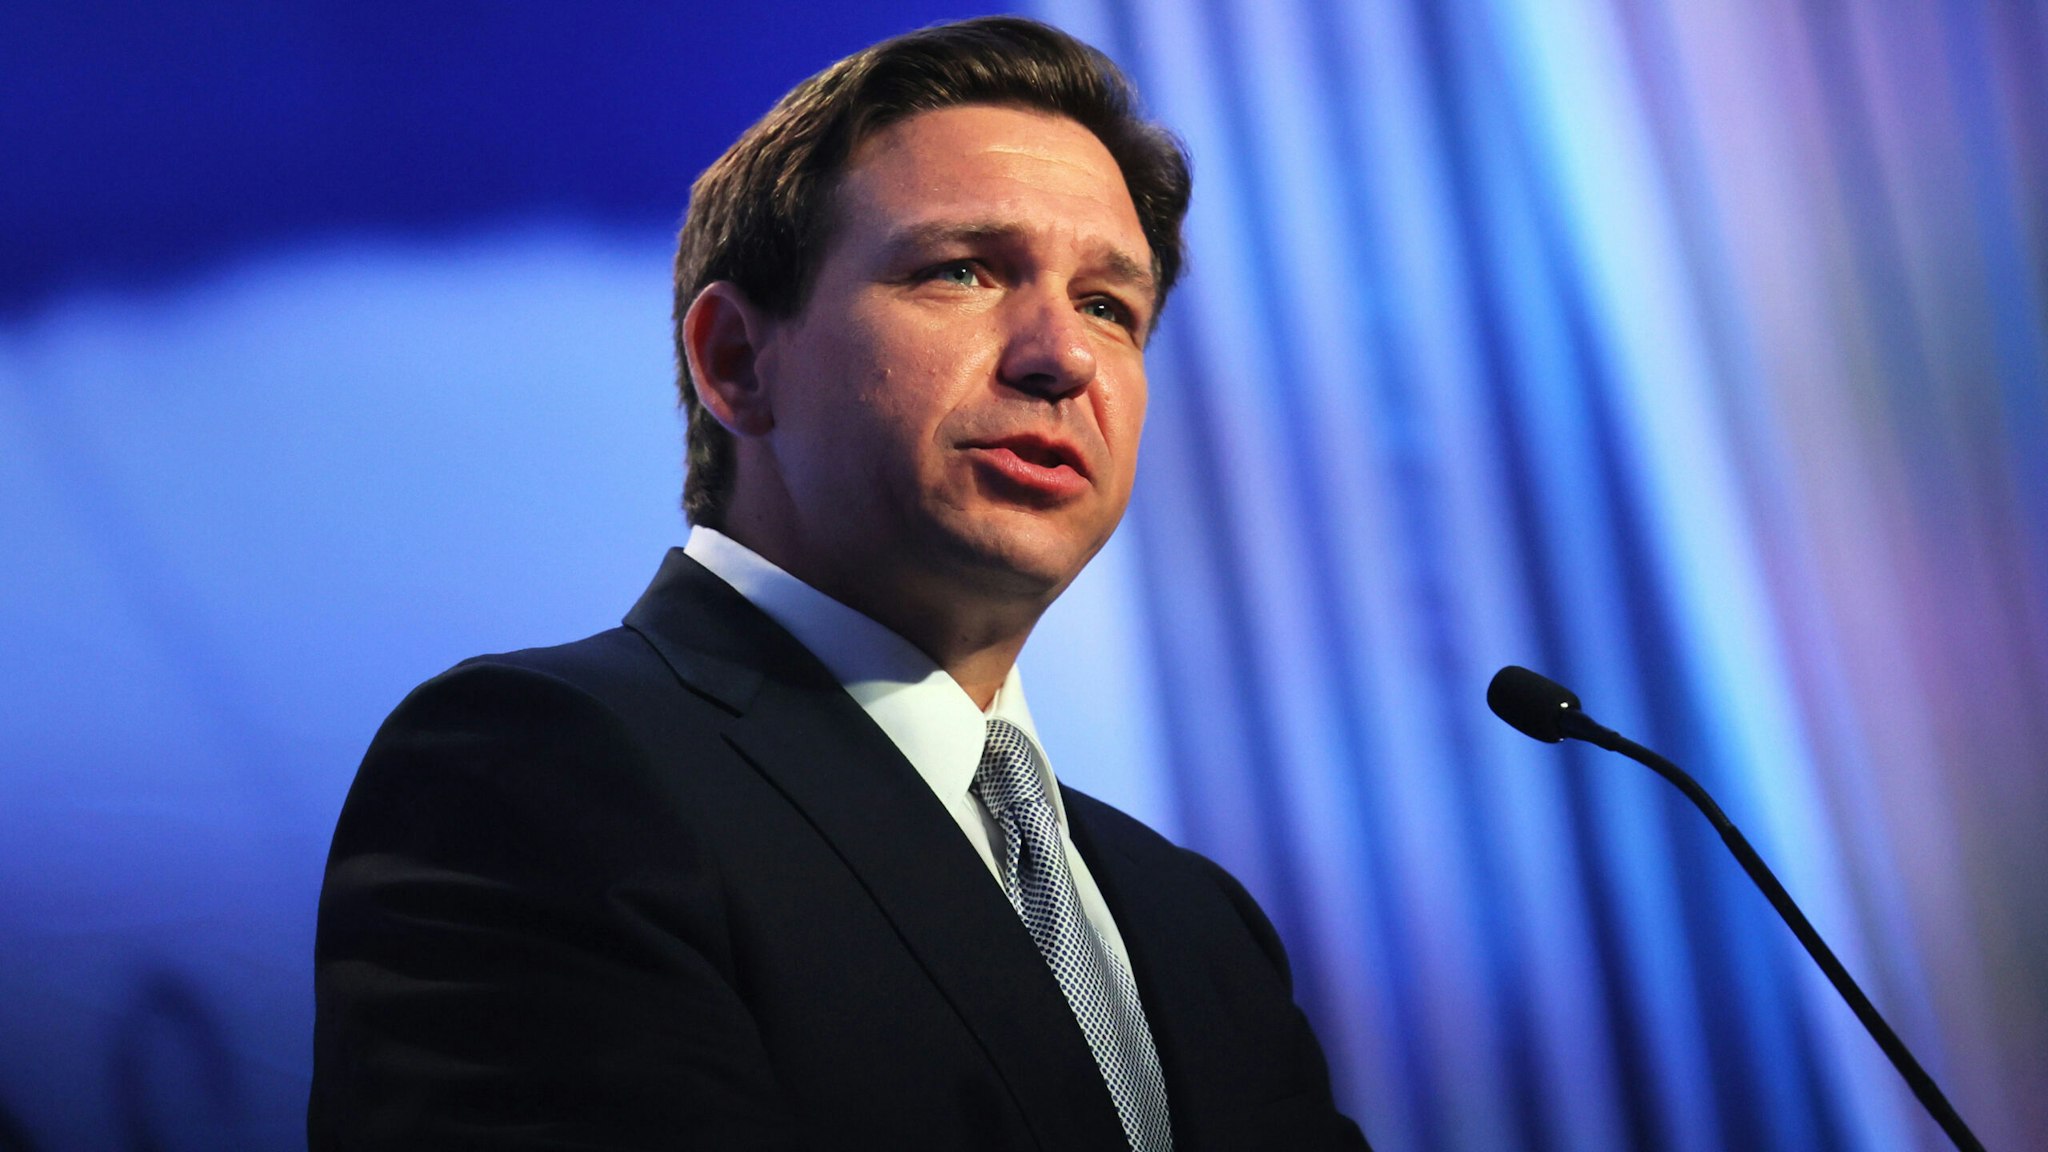 PHILADELPHIA, PENNSYLVANIA - JUNE 30: Republican presidential candidate Florida Gov. Ron DeSantis speaks during the Moms for Liberty Joyful Warriors national summit at the Philadelphia Marriott Downtown on June 30, 2023 in Philadelphia, Pennsylvania. The self-labeled "parental rights" summit is bringing school board hopefuls from across the country where attendees will receive training and hear from Republican presidential candidates which includes former U.S. President Donald Trump, Florida Gov. Ron DeSantis and former South Carolina Gov. Nikki Haley. The summit, which is being held in an overwhelmingly Democratic Philadelphia, have drawn protestors since the event was announced due to their pushing of book bans accusing schools of ideological overreach, including teaching about race, gender, and sexuality.